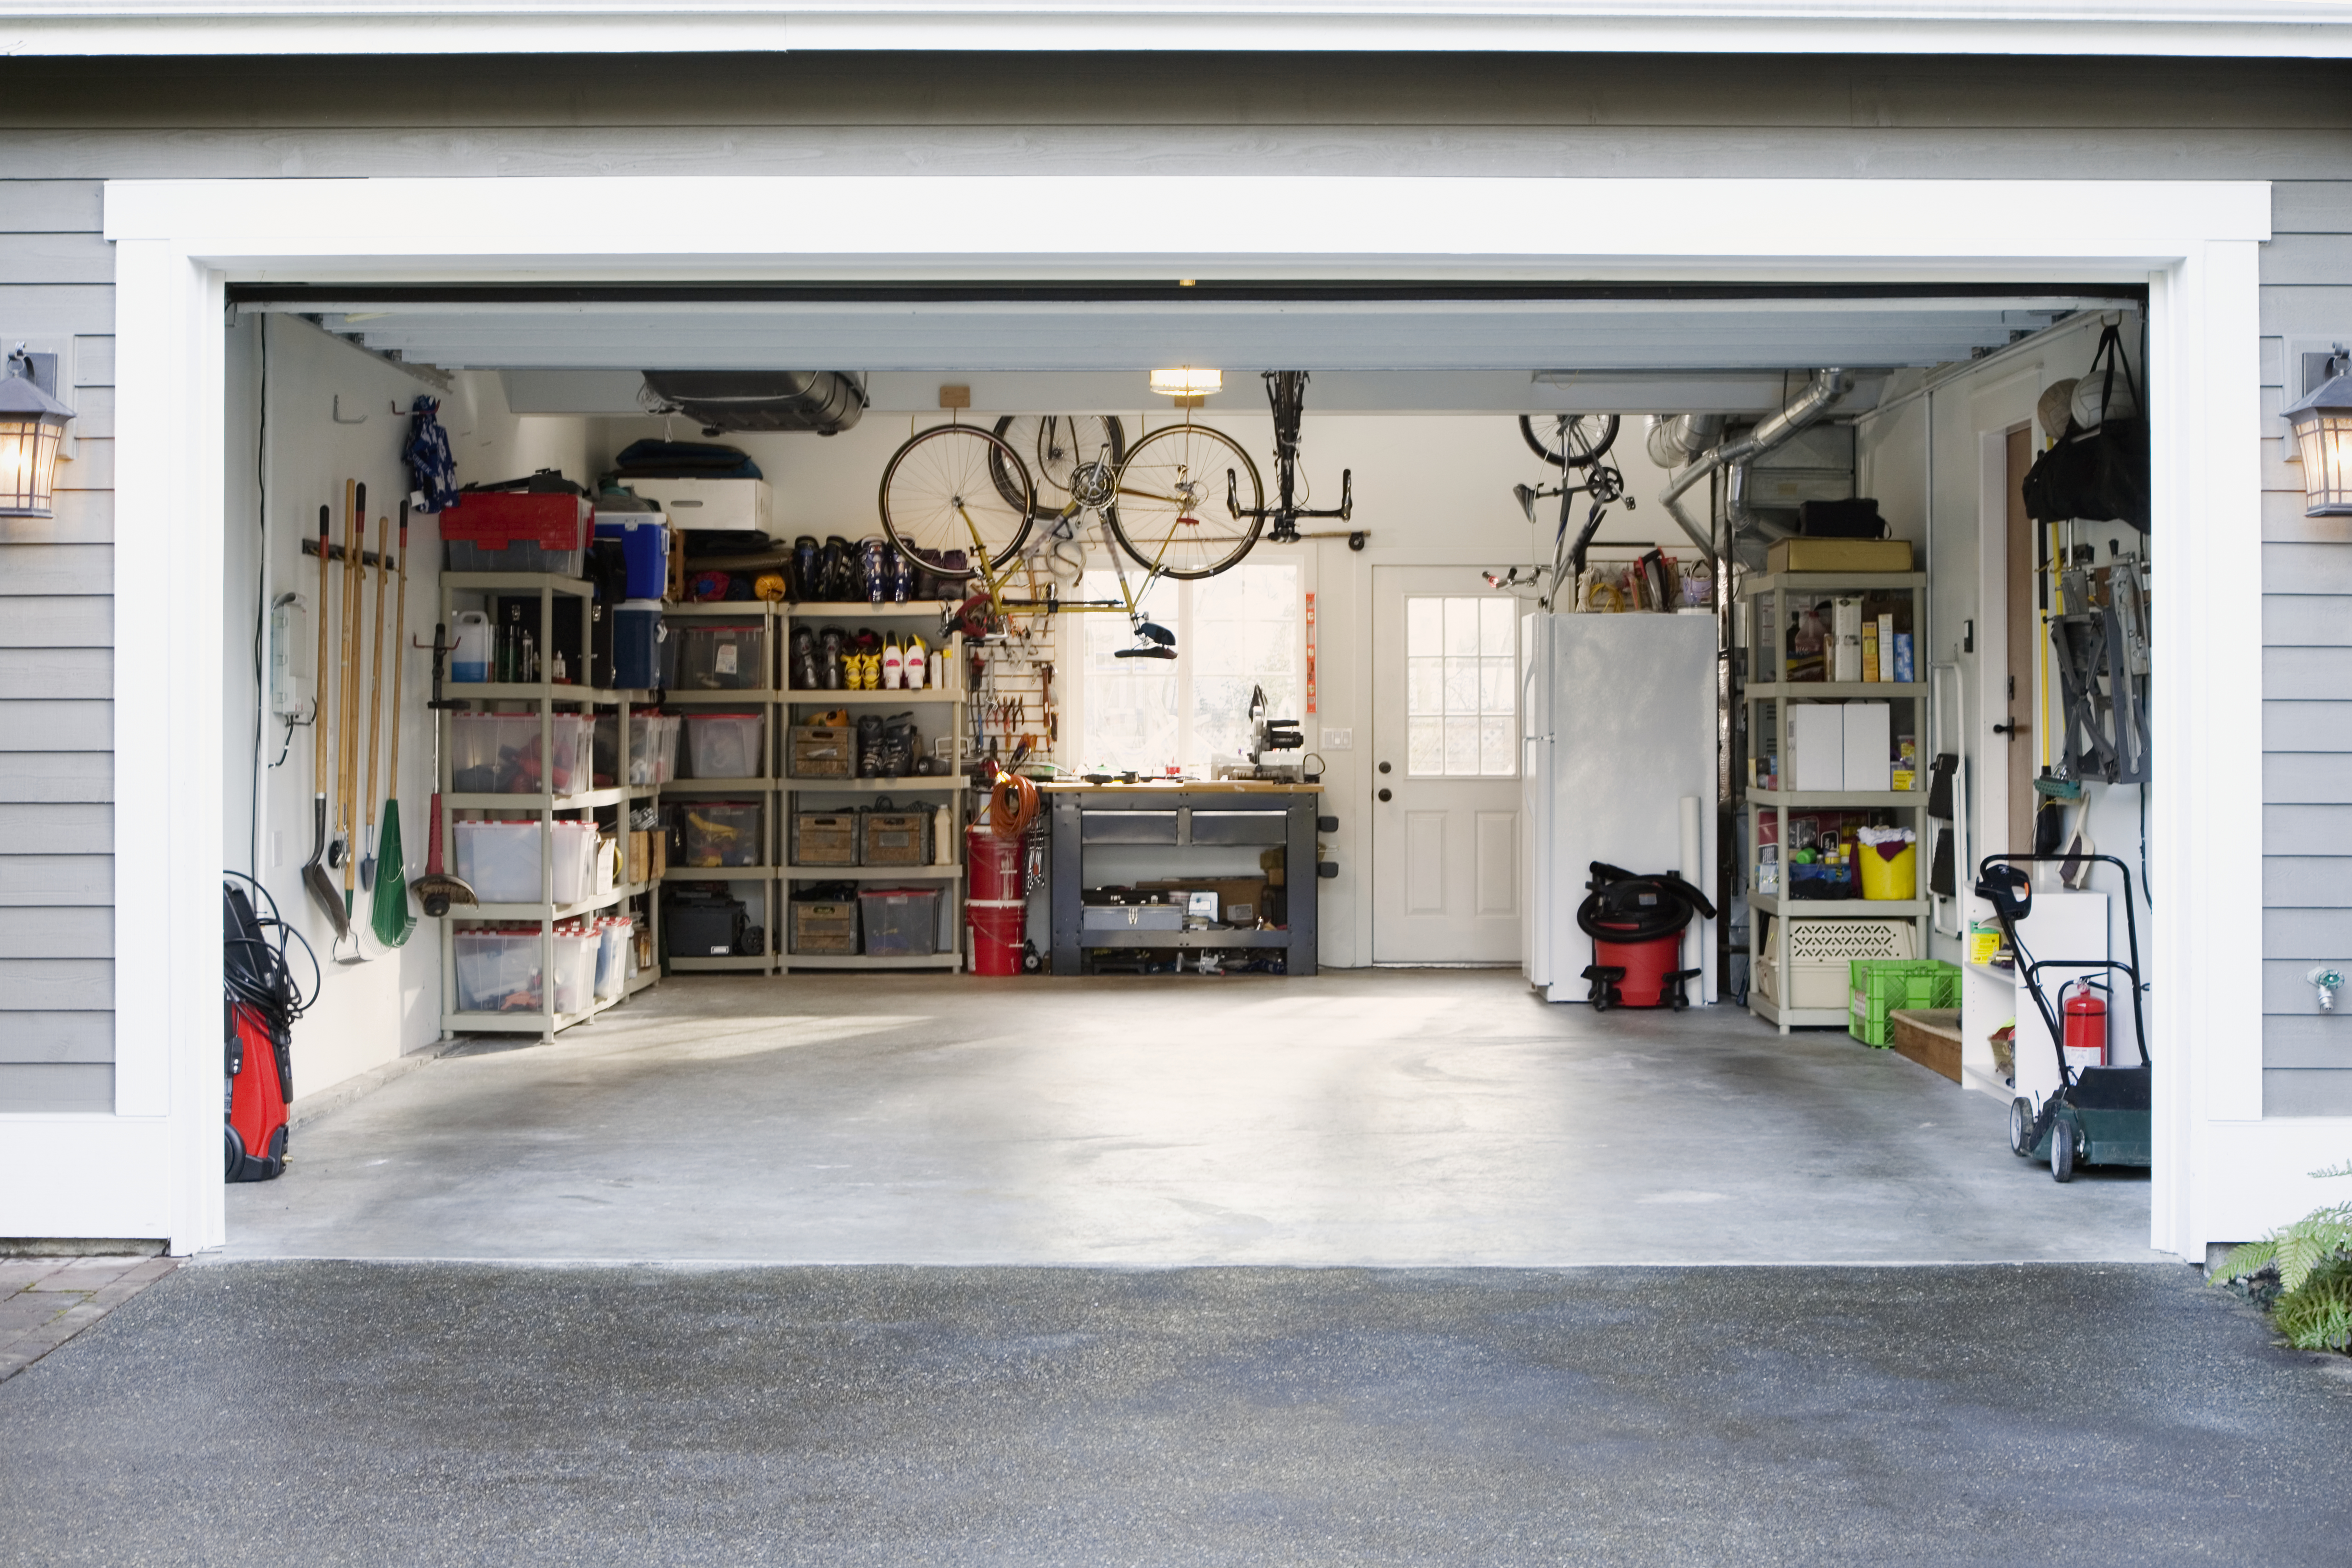 Driving into garage where there is little room for error?